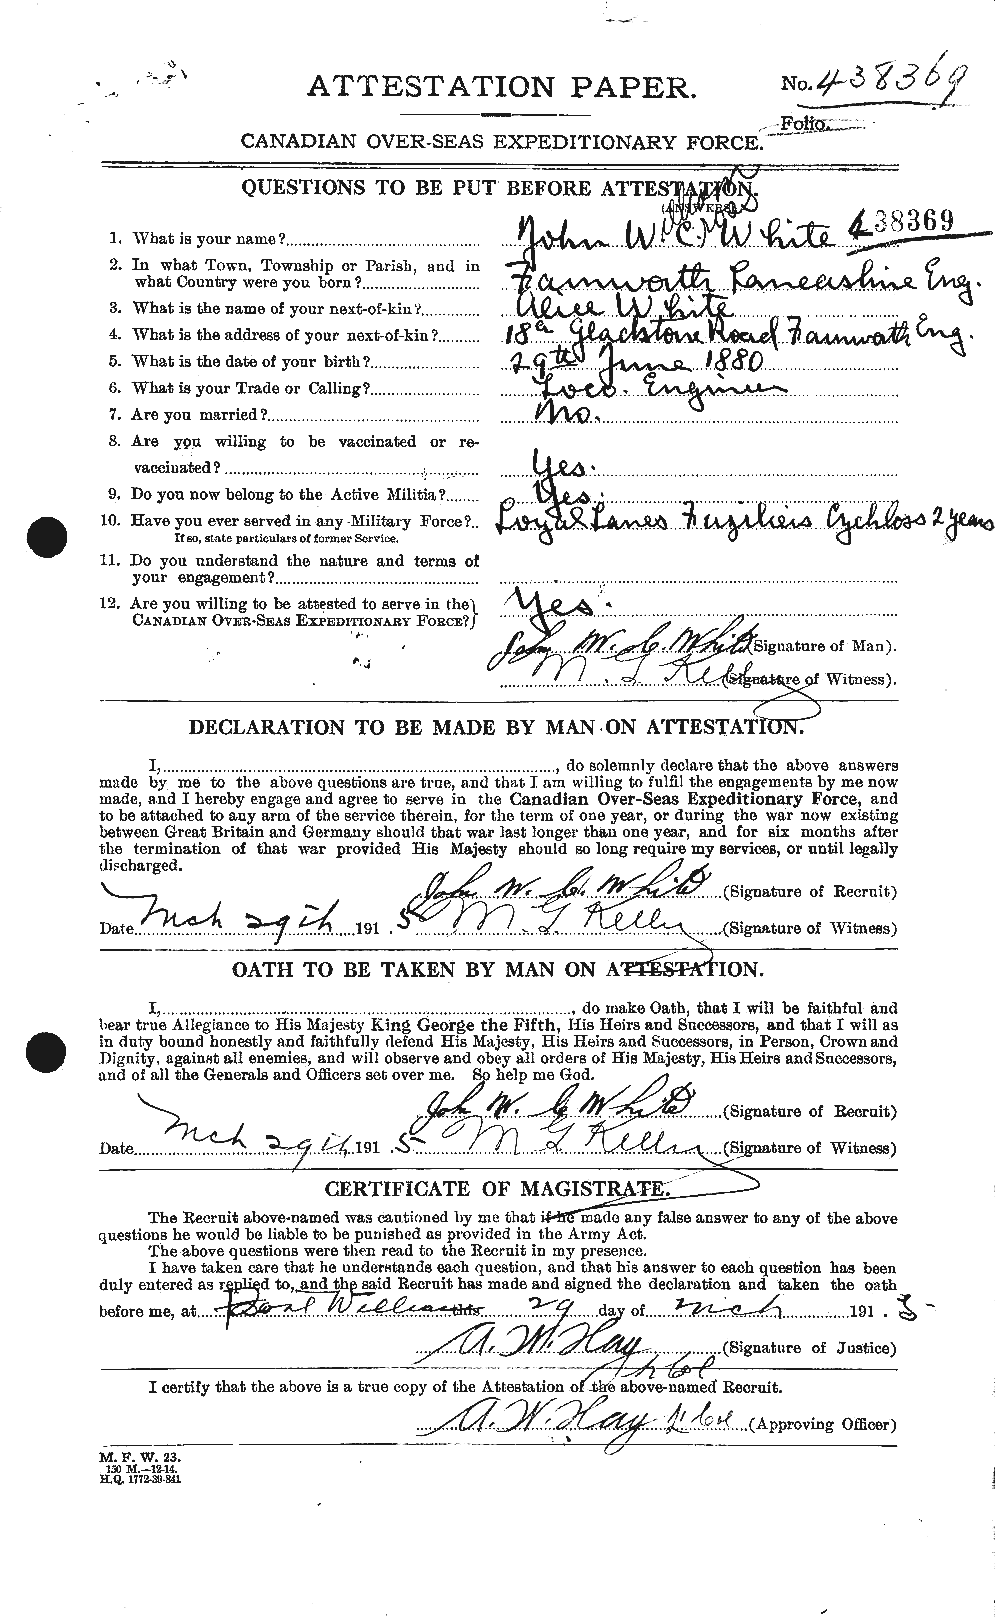 Personnel Records of the First World War - CEF 671618a